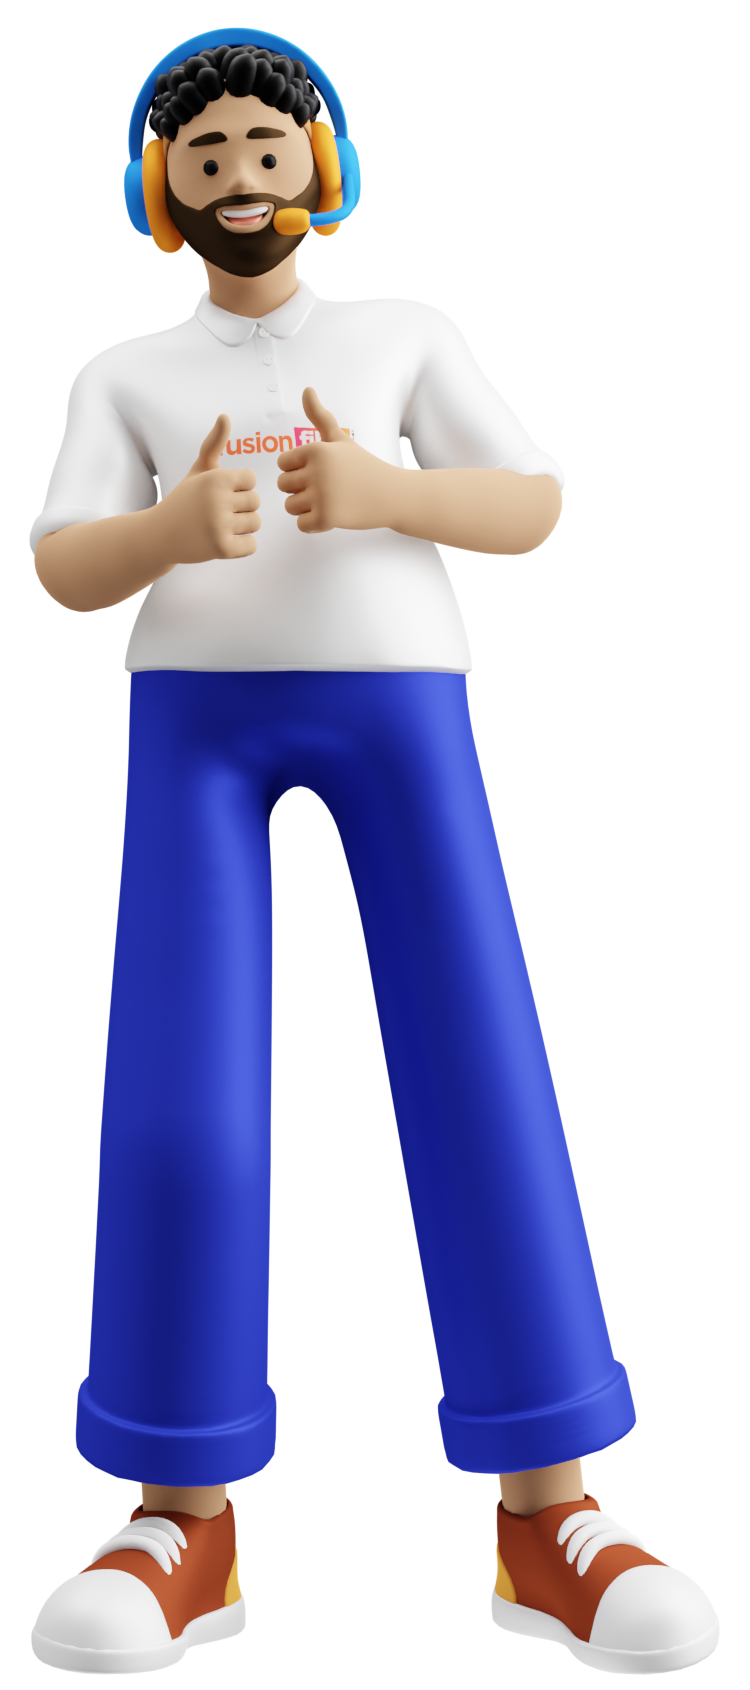 animated fusion fibre business employee with both thumbs up